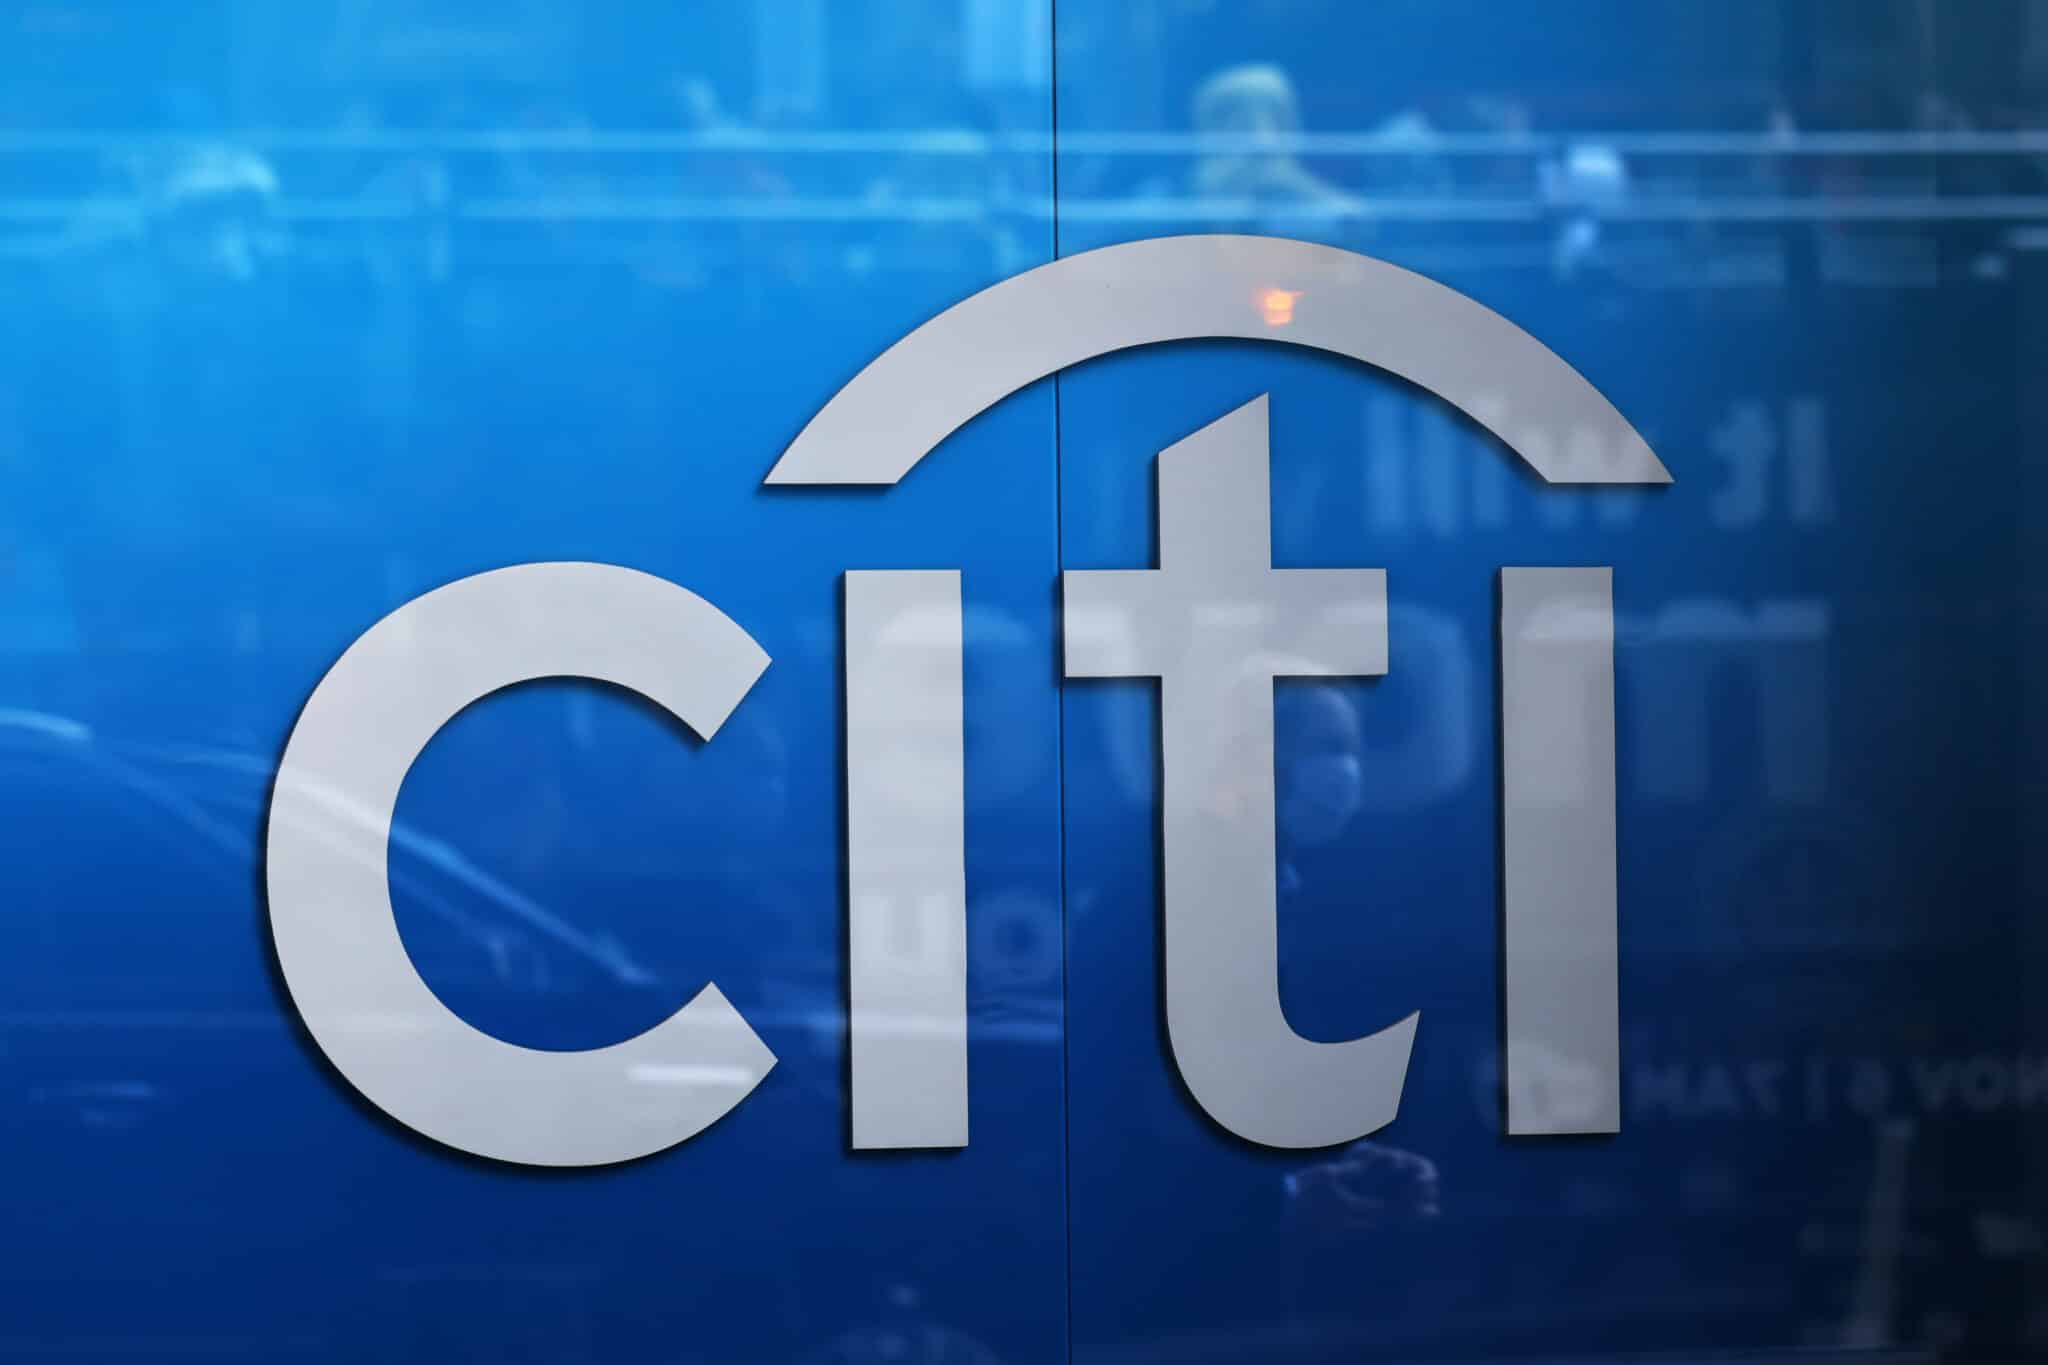 NEW YORK, NEW YORK - OCTOBER 14: A Citibank signage is seen on Broadway on October 14, 2022 in New York City. Citigroup announced that its third-quarter earnings fell 25% as its shares gained more than 2% helped by rising interest rates.  (Photo by Michael M. Santiago/Getty Images)